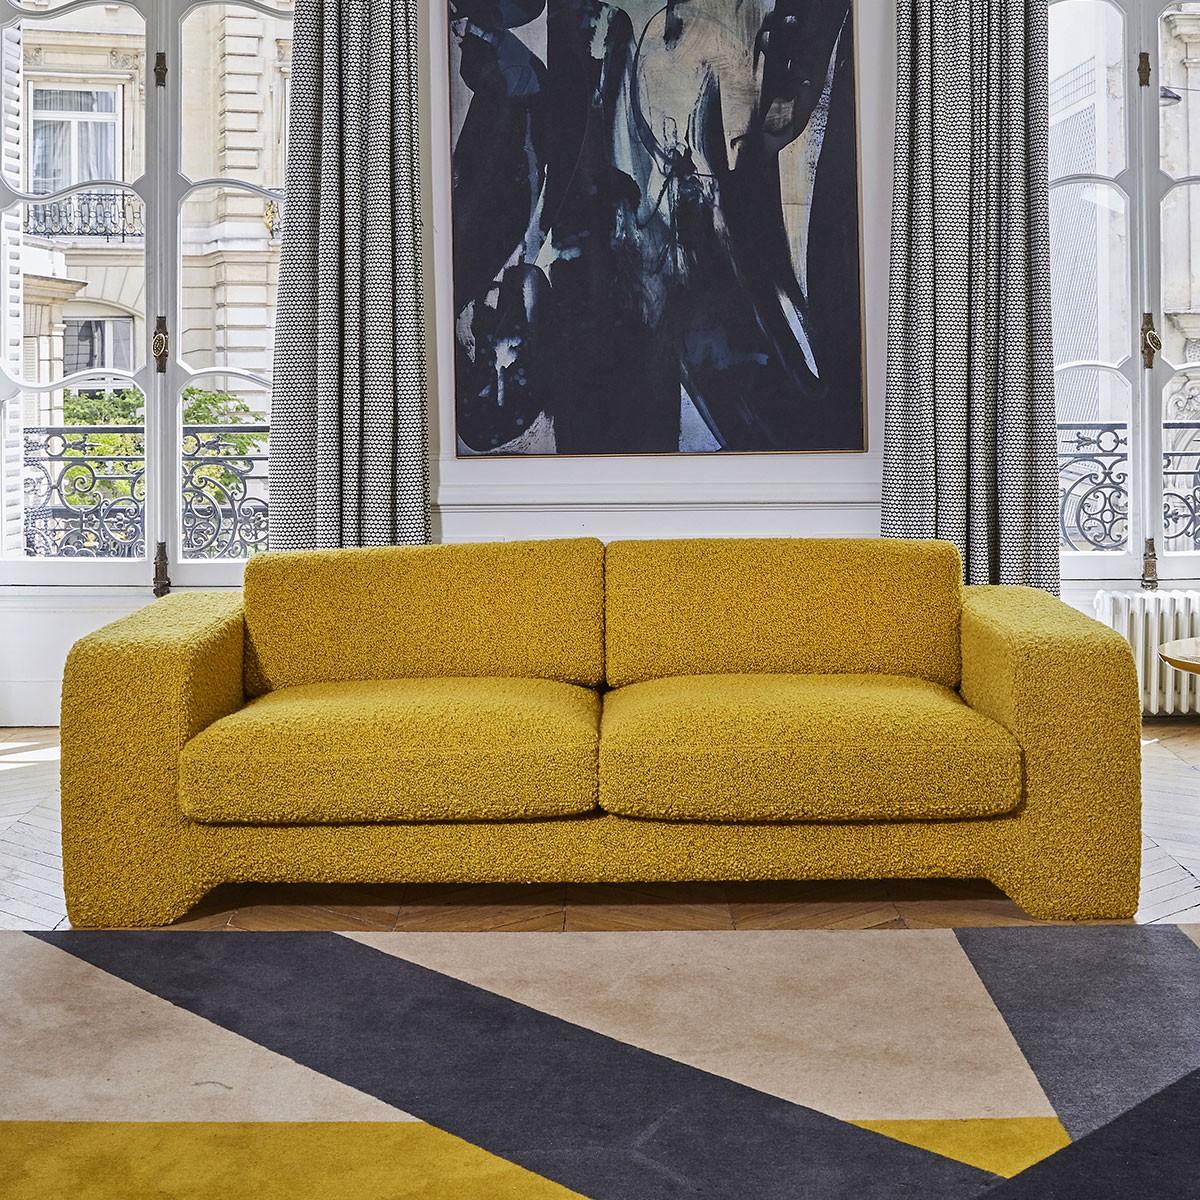 Popus Editions Giovanna 2.5 Seater Sofa in Oster Cork Linen Upholstery.

Giovanna is a sofa with a strong profile. A sober, plush line, with this famous detail that changes everything, so as not to forget its strength of character and this